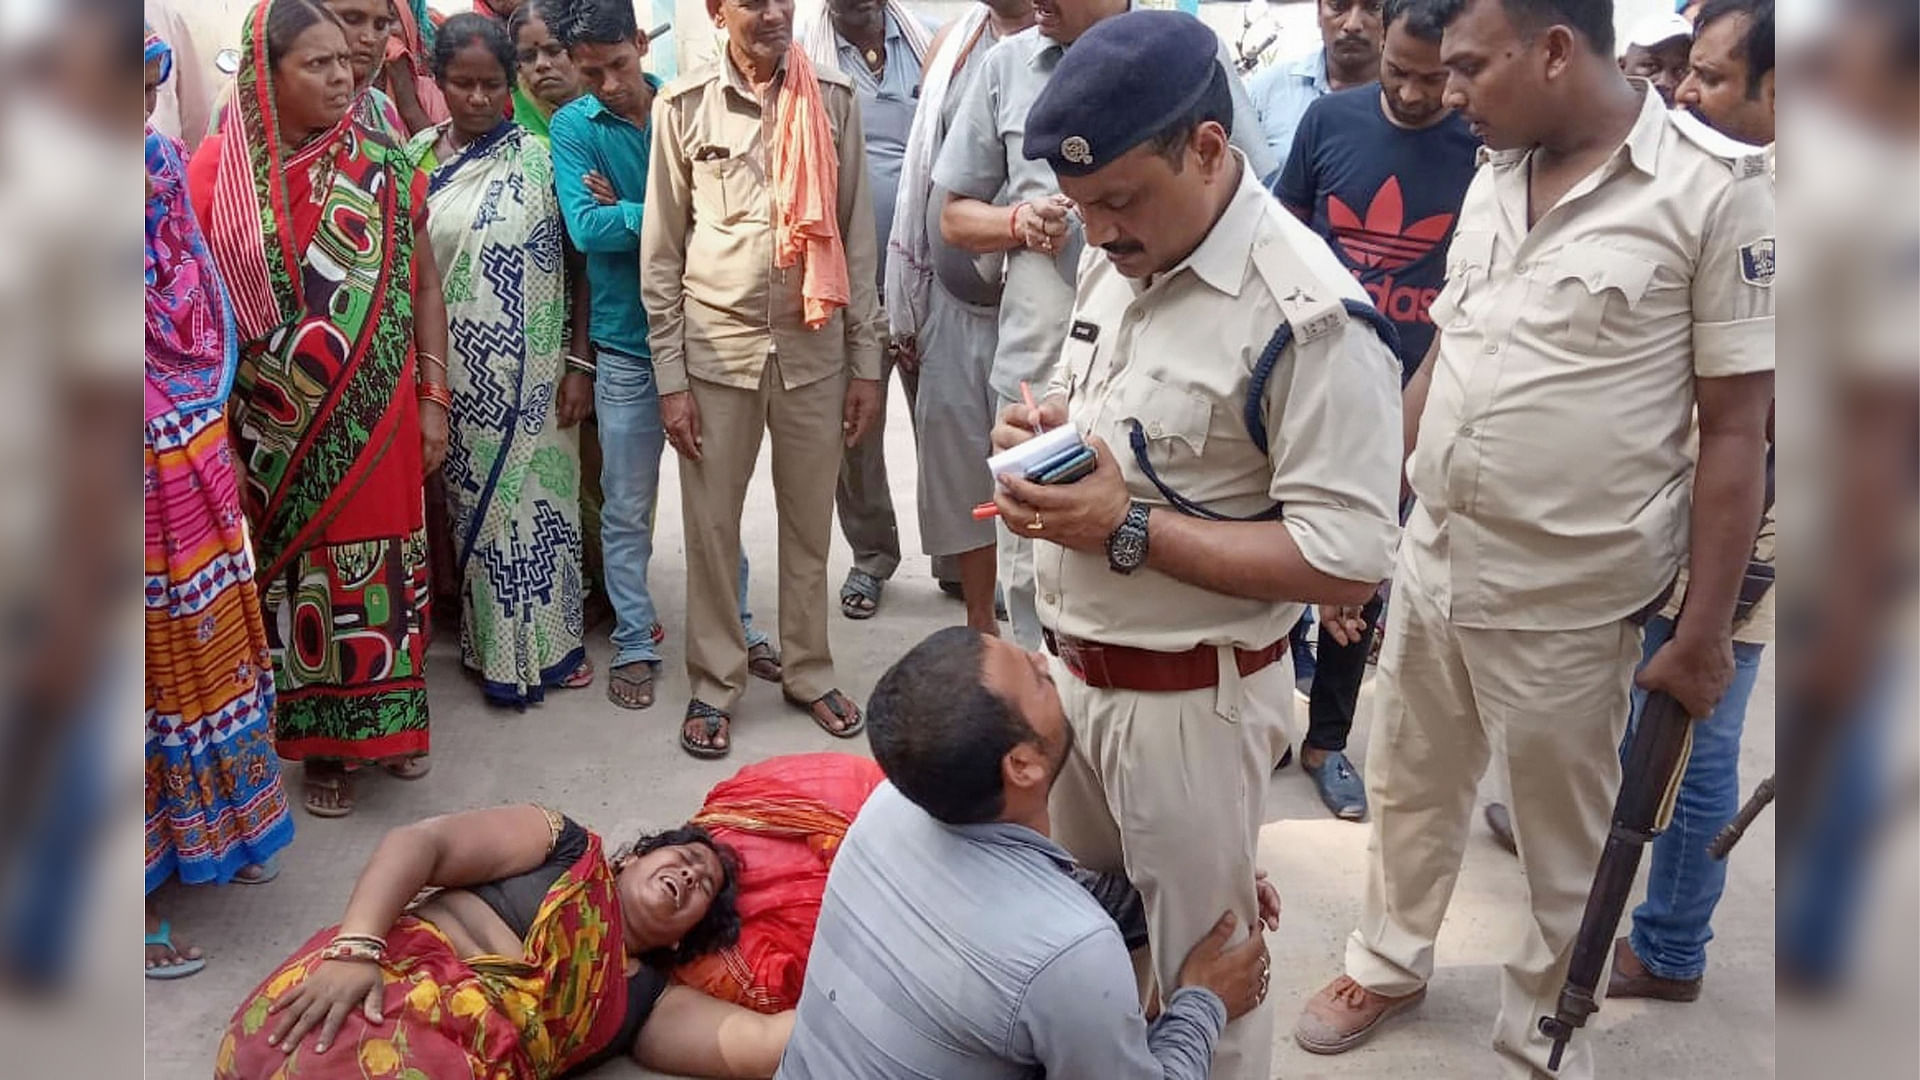 Three people were beaten to death by locals on the suspicion of cattle theft in Chhapra area of Bihar’s Saran.